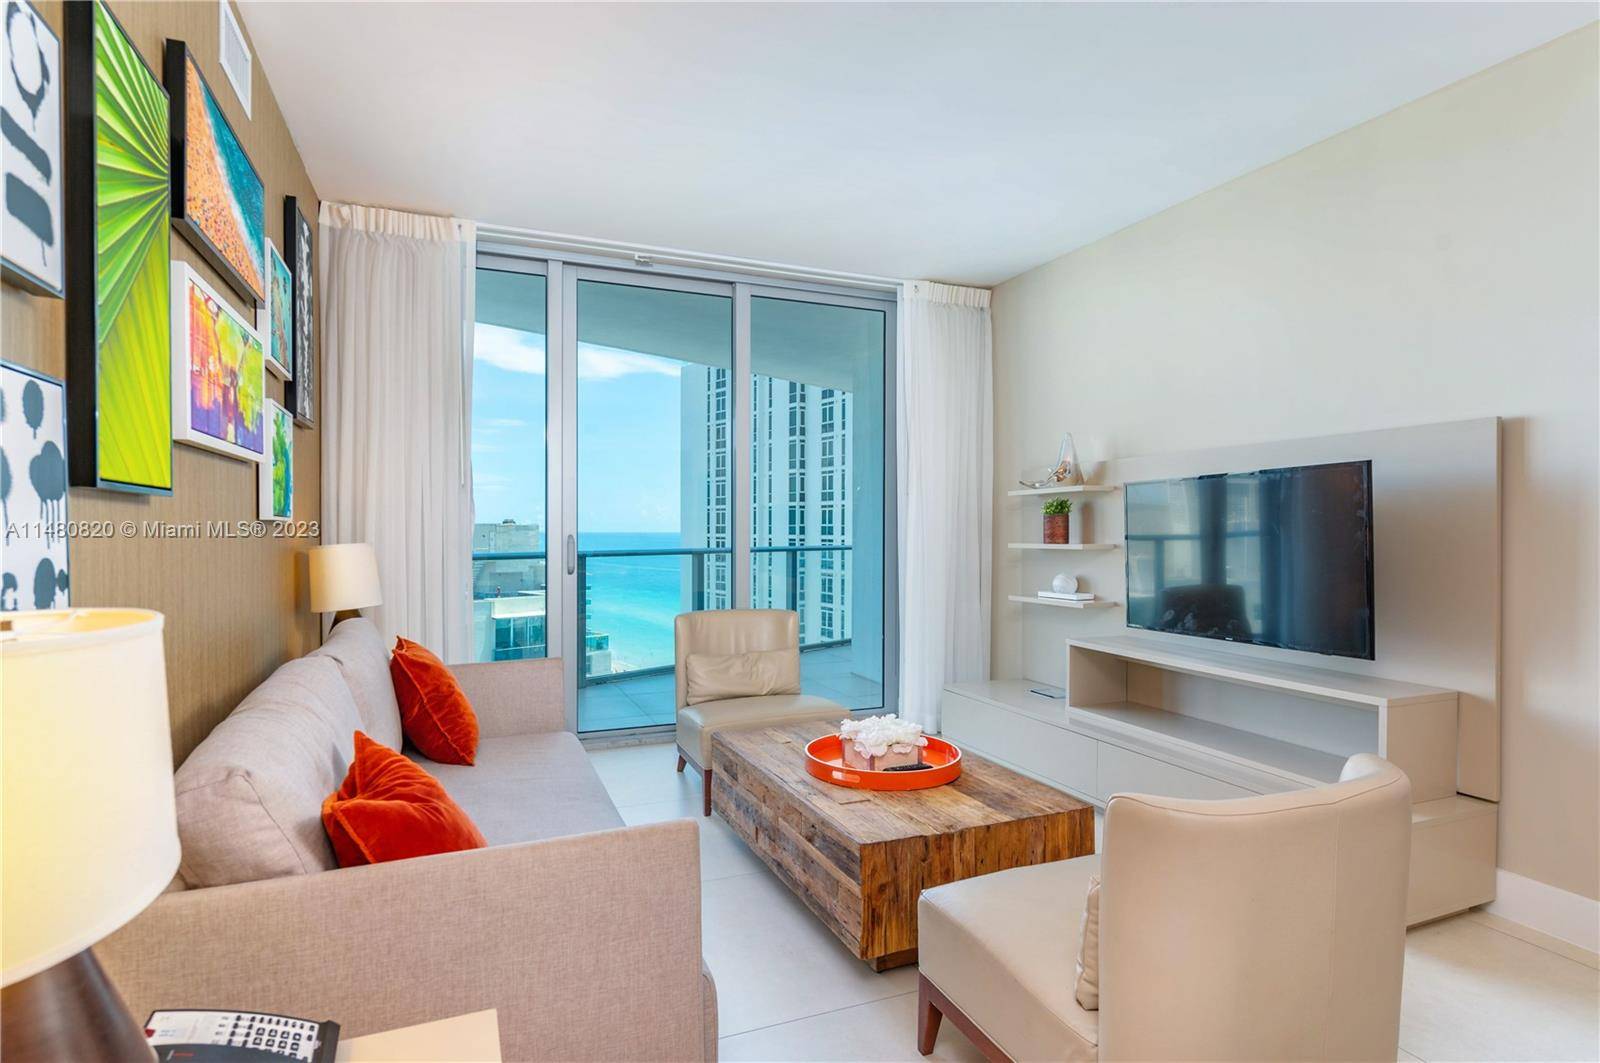 WHO SAID you can t MIX MONEY MAKING AIRBNB BUSINESS with PLEASURE OF STAYING IN YOUR OWN, SPECTACULAR, OCEAN VIEW, BEACHSIDE, Turn Key split 2Br, 2Ba CONDO in a world ...